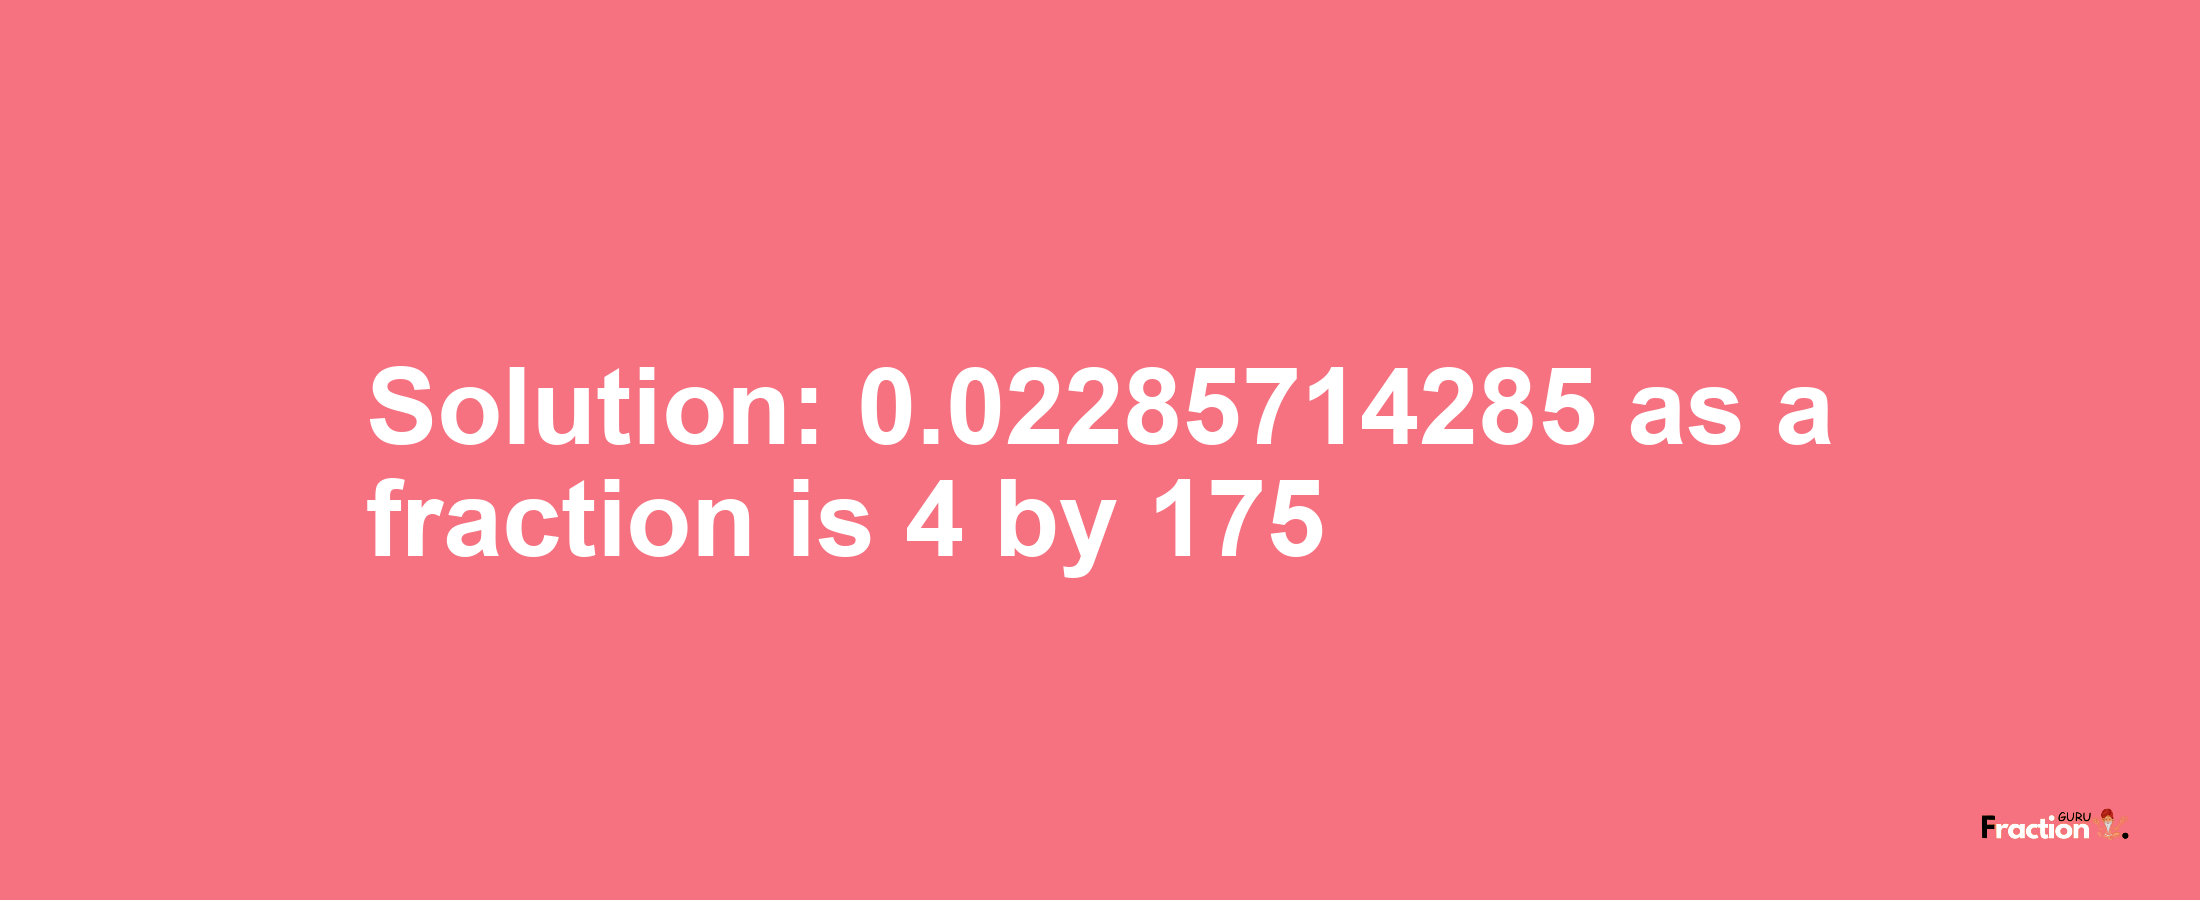 Solution:0.02285714285 as a fraction is 4/175